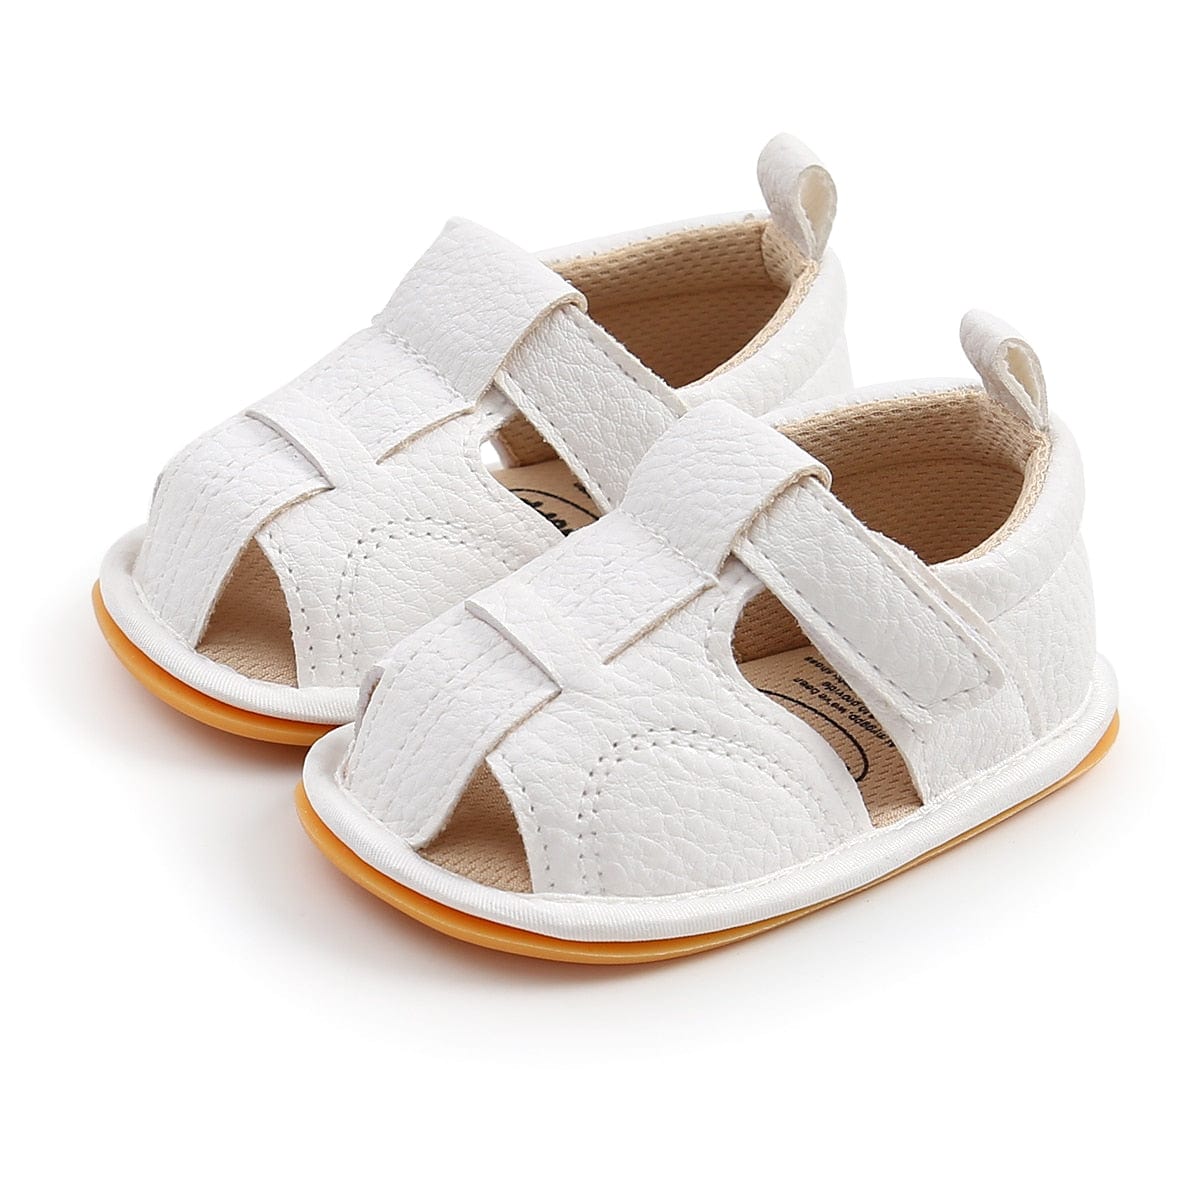 Proactive Baby Baby Footwear White / 0-6 Months MYGGPP Summer Baby Sandals For Baby Girl/Boy